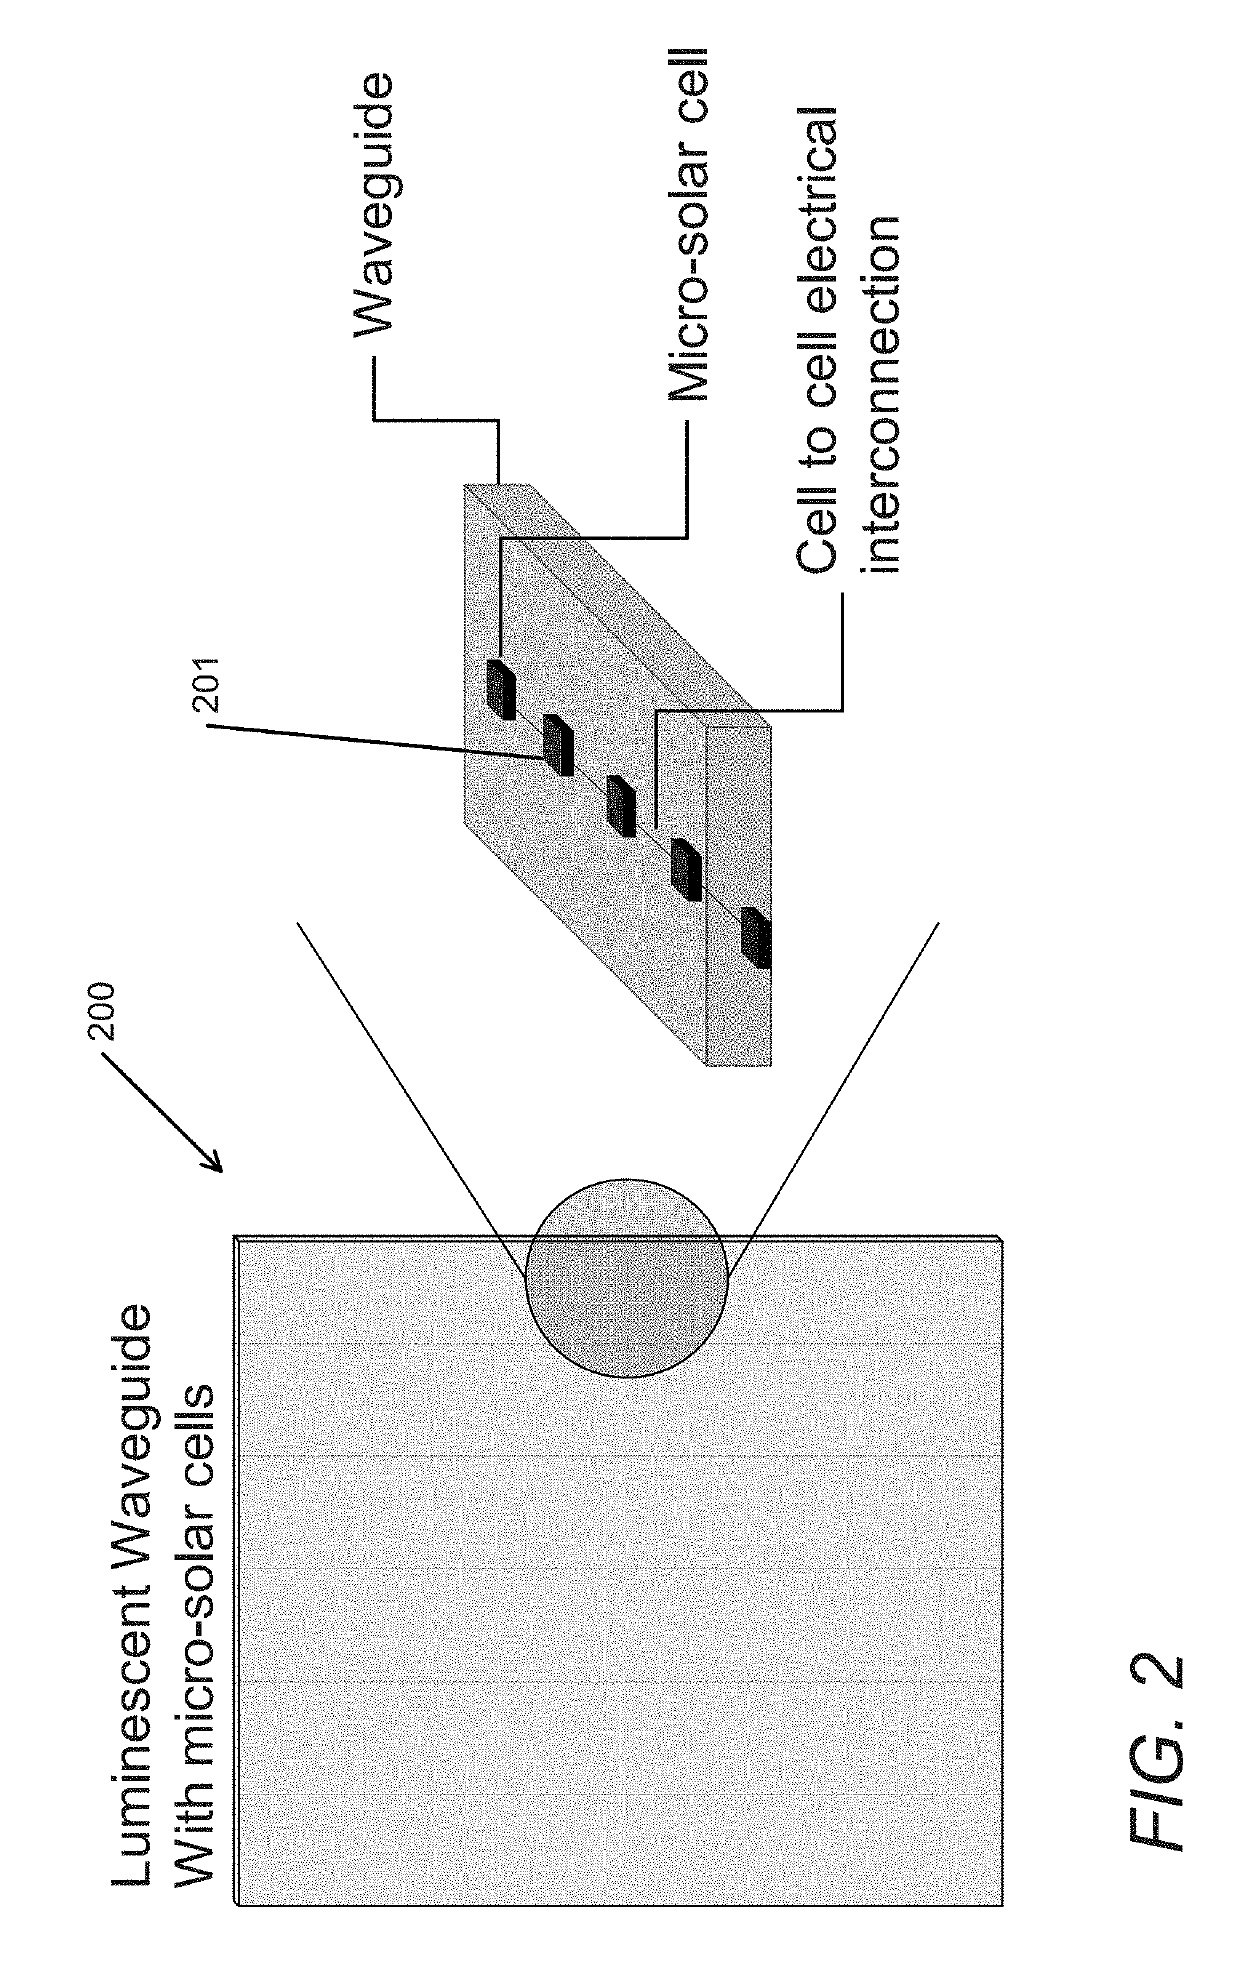 Micro-Grid Luminescent Solar Concentrators and Related Methods of Manufacturing